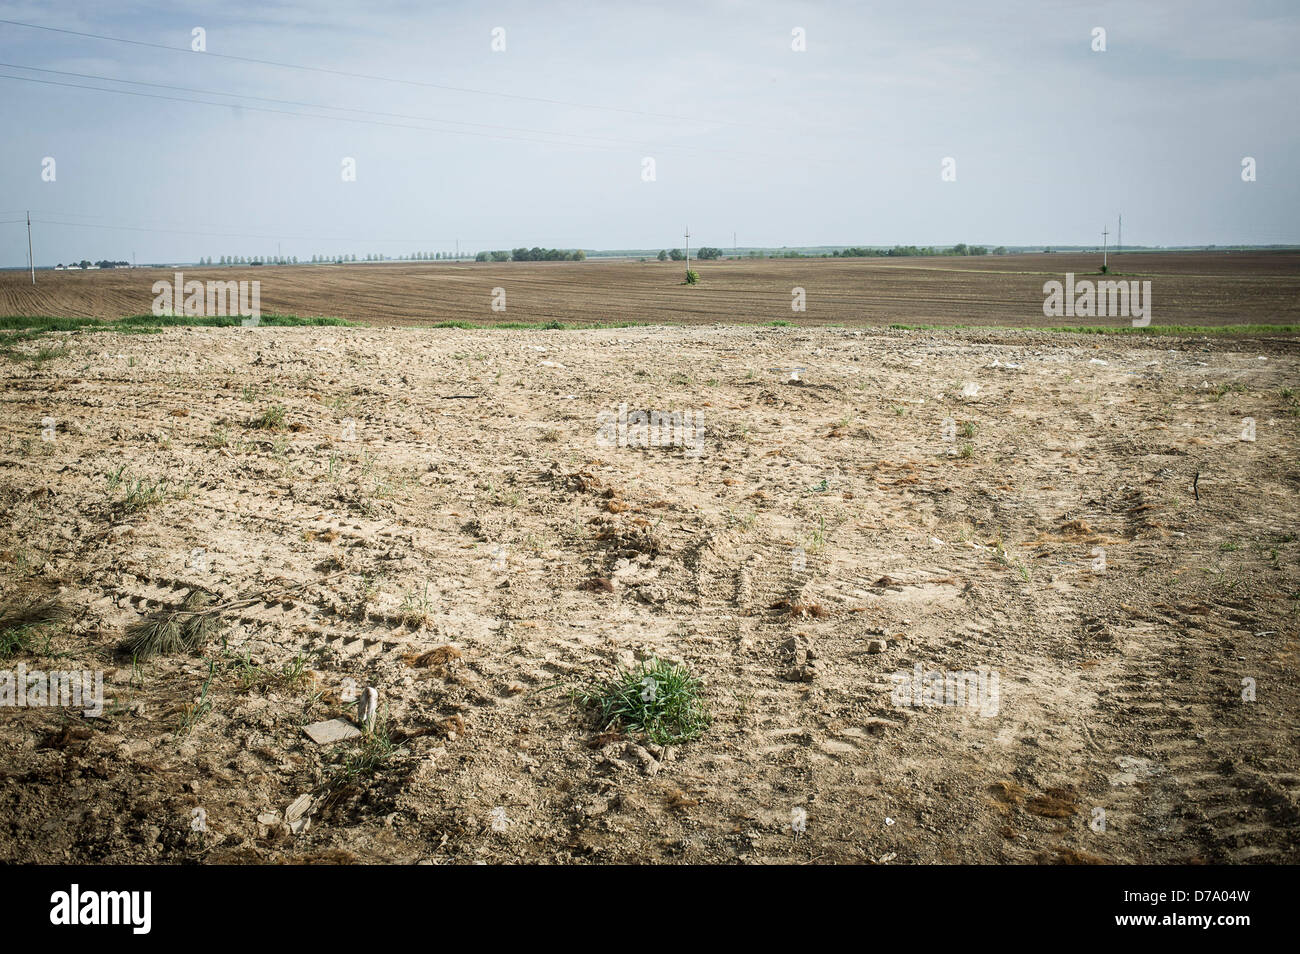 Sotin, Croatia. 30th April 2013. Mass grave found in the slaughterhouse of  Sotin. The human remains of the people were mixed with particles of animal. 13 residents of Sotin, the suburbs of Vukovar, were killed by Serbs in the night 26/27 December 1991. After 22 years this is the first indication of official cooperation between the Government of Croatia and the Serbian authorities on the issue of missing persons. Croatia currently looking for 1703, missing people.  by Wiktor Dabkowski/DPA/Alamy Live News Stock Photo